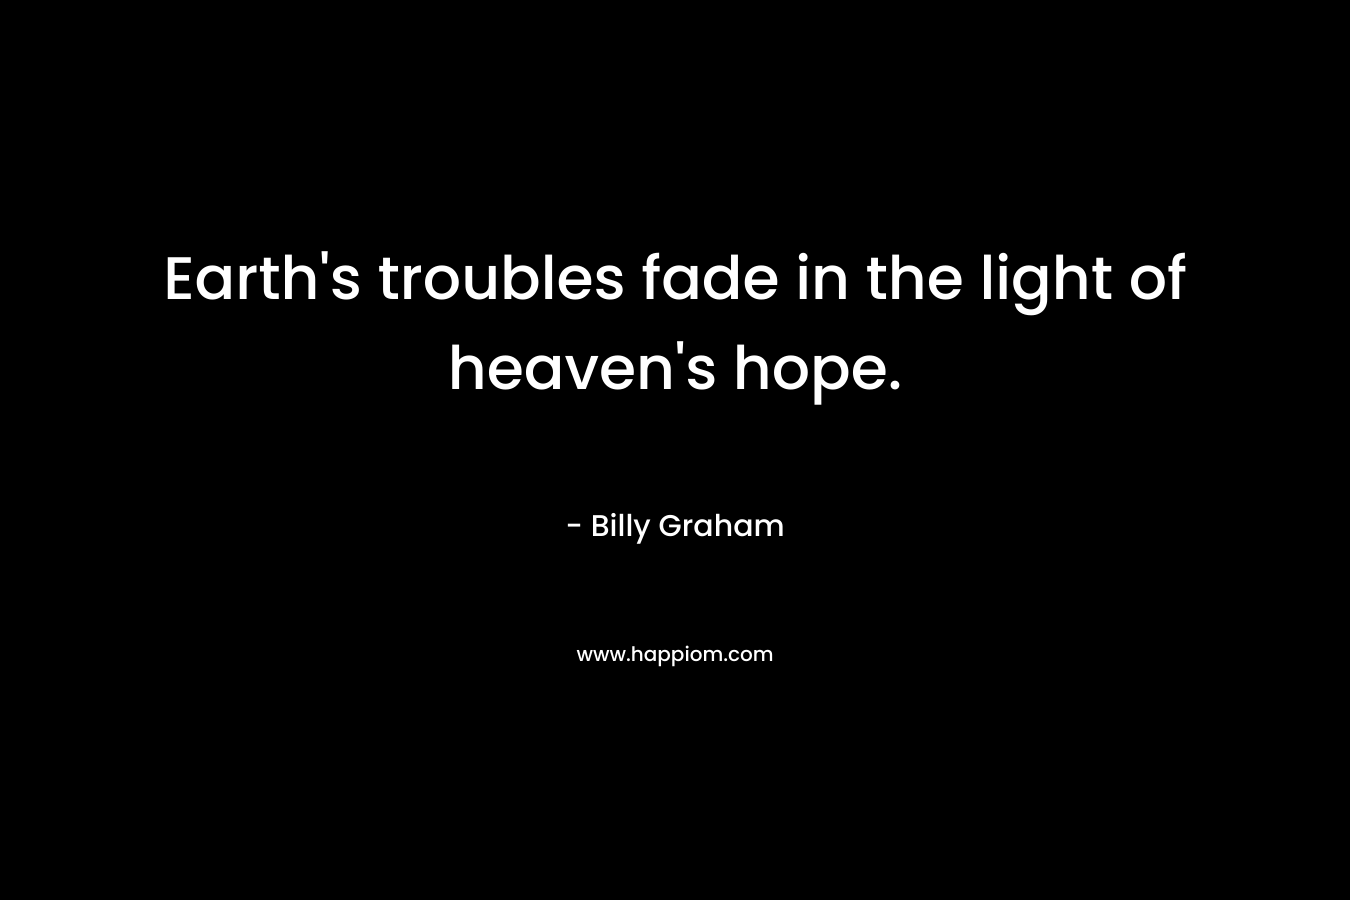 Earth’s troubles fade in the light of heaven’s hope. – Billy Graham